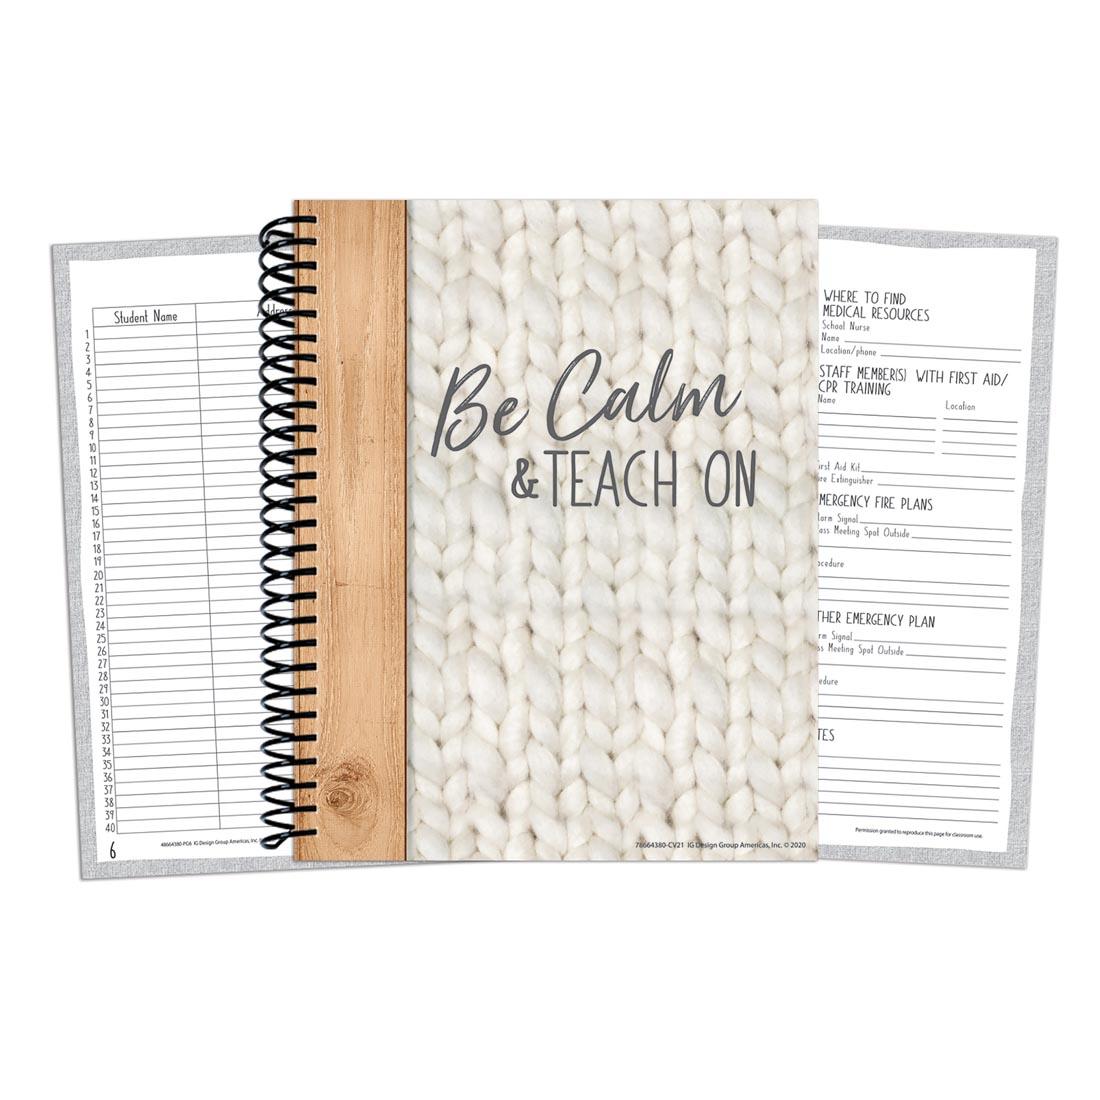 Be Calm & Teach On Lesson Plan & Record Book from A Close-Knit Class collection by Eureka